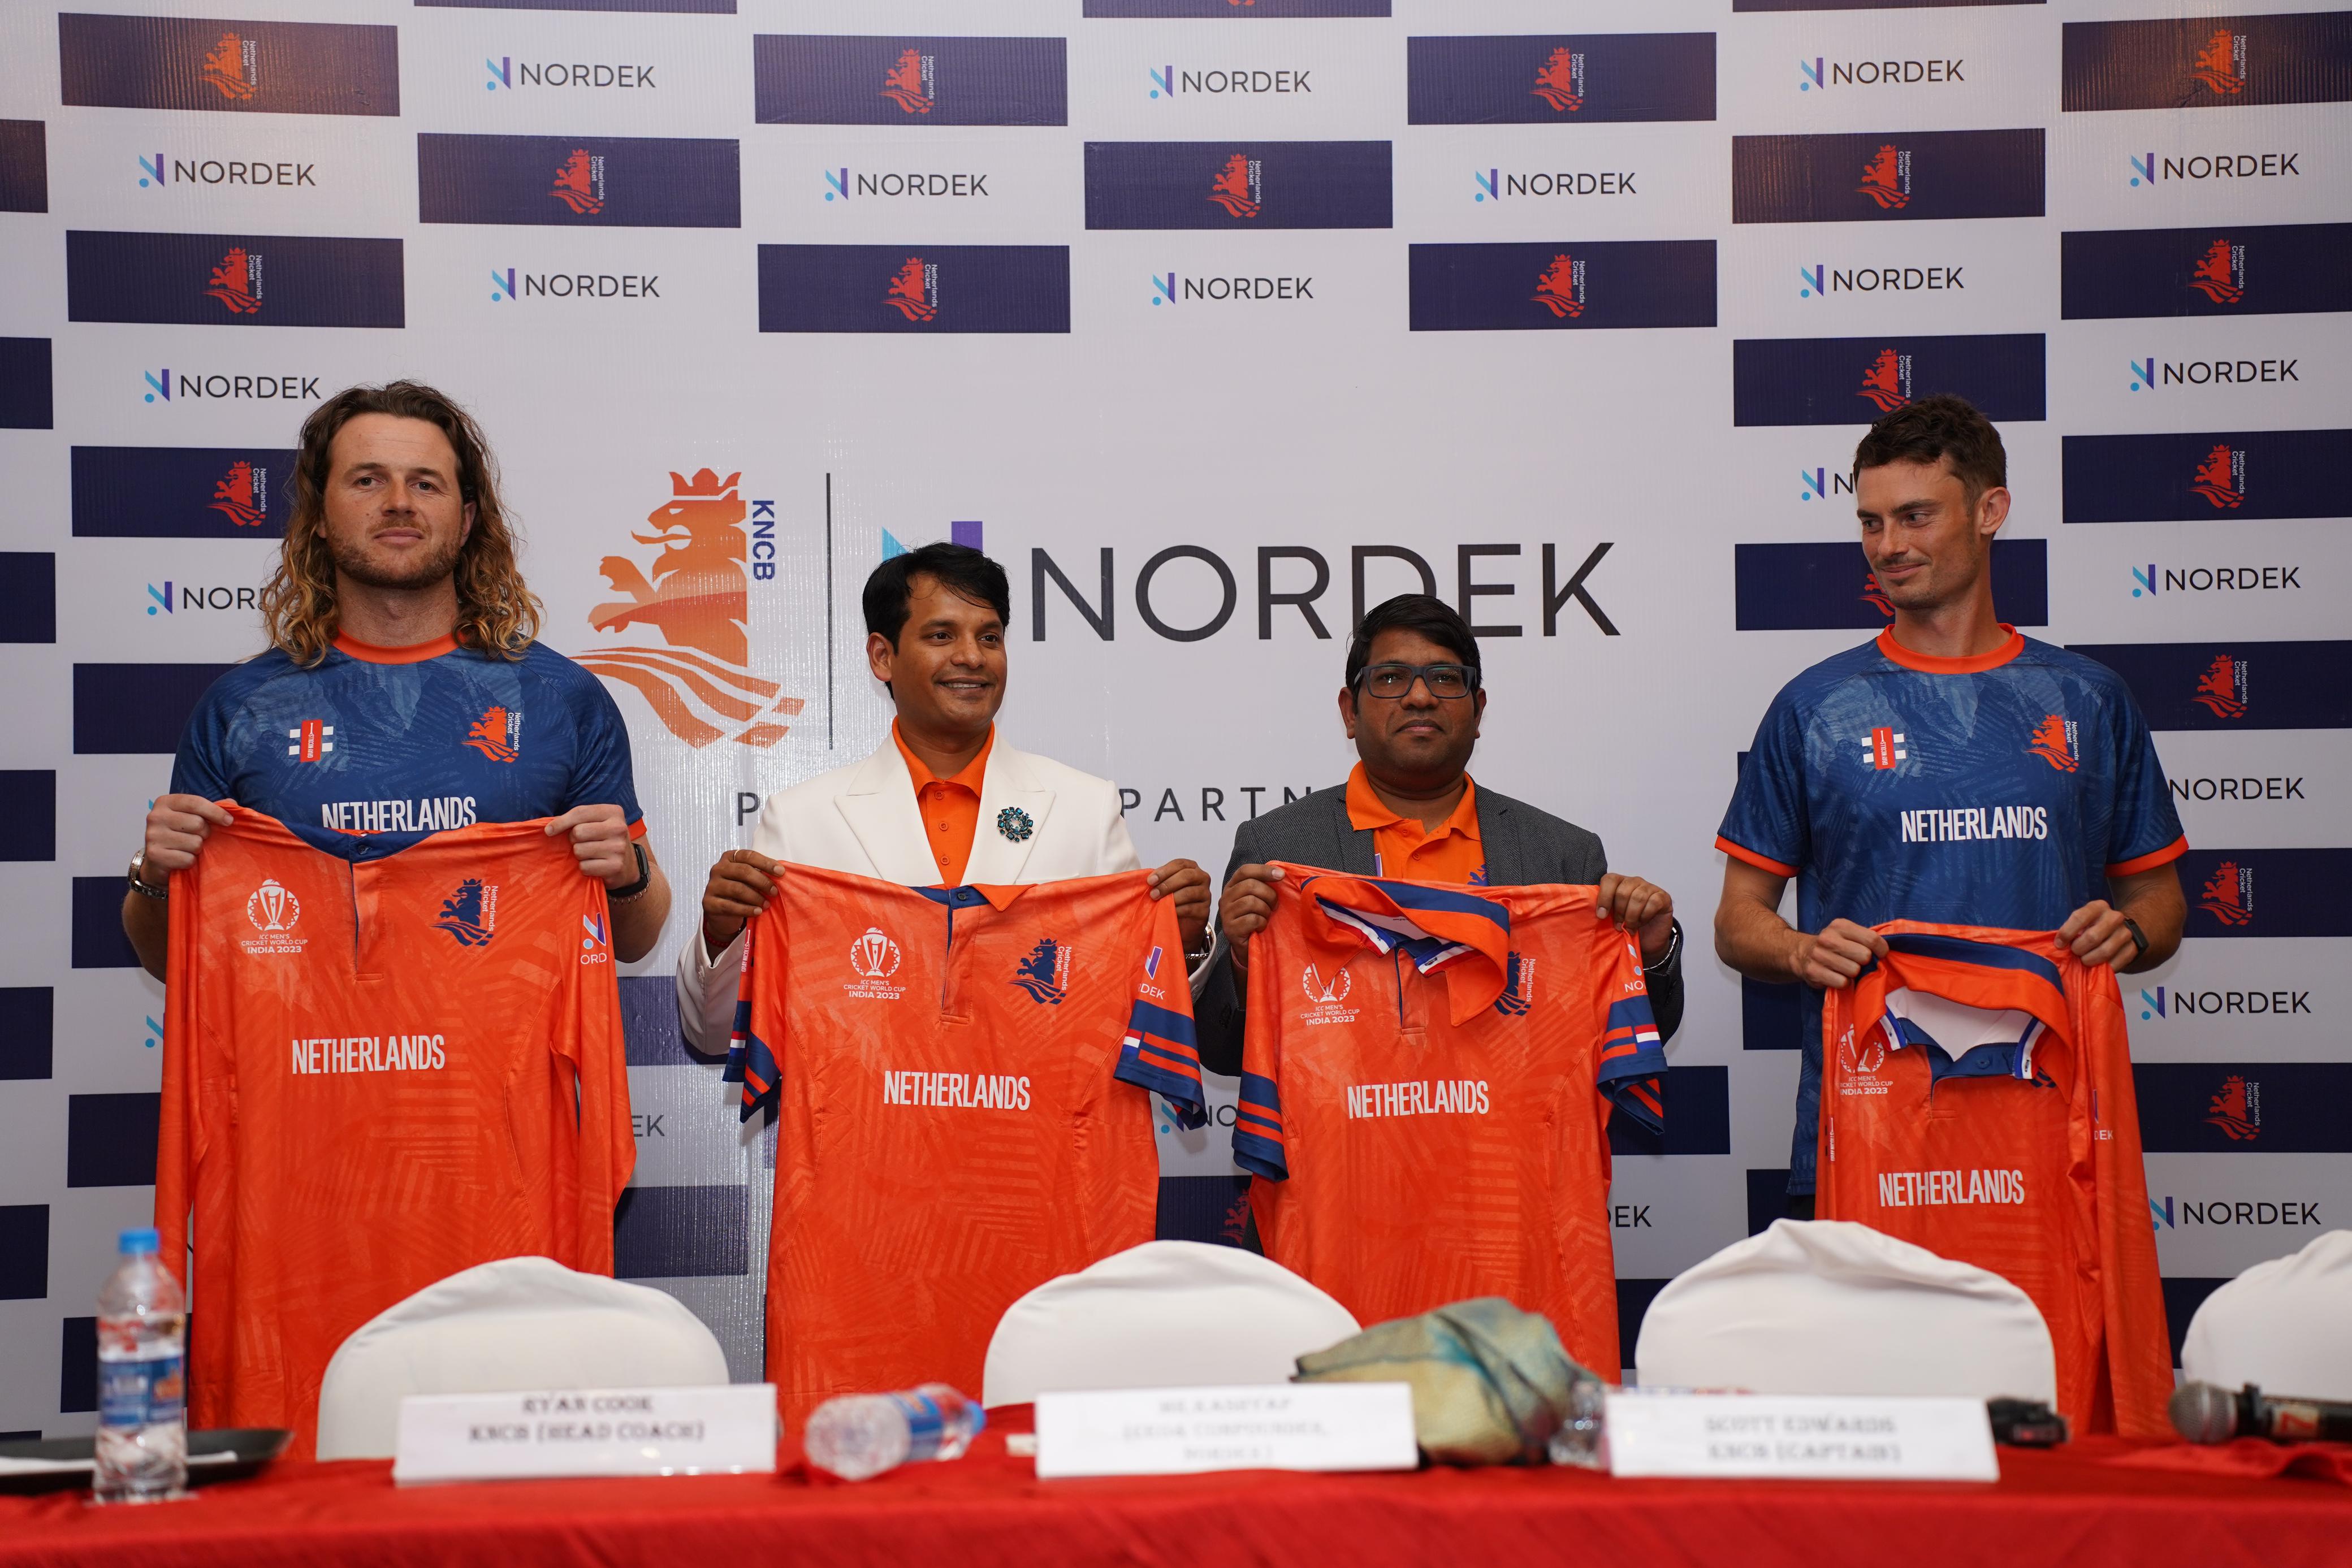 Netherlands unveil new jersey sponsored by Nordic Blockchain